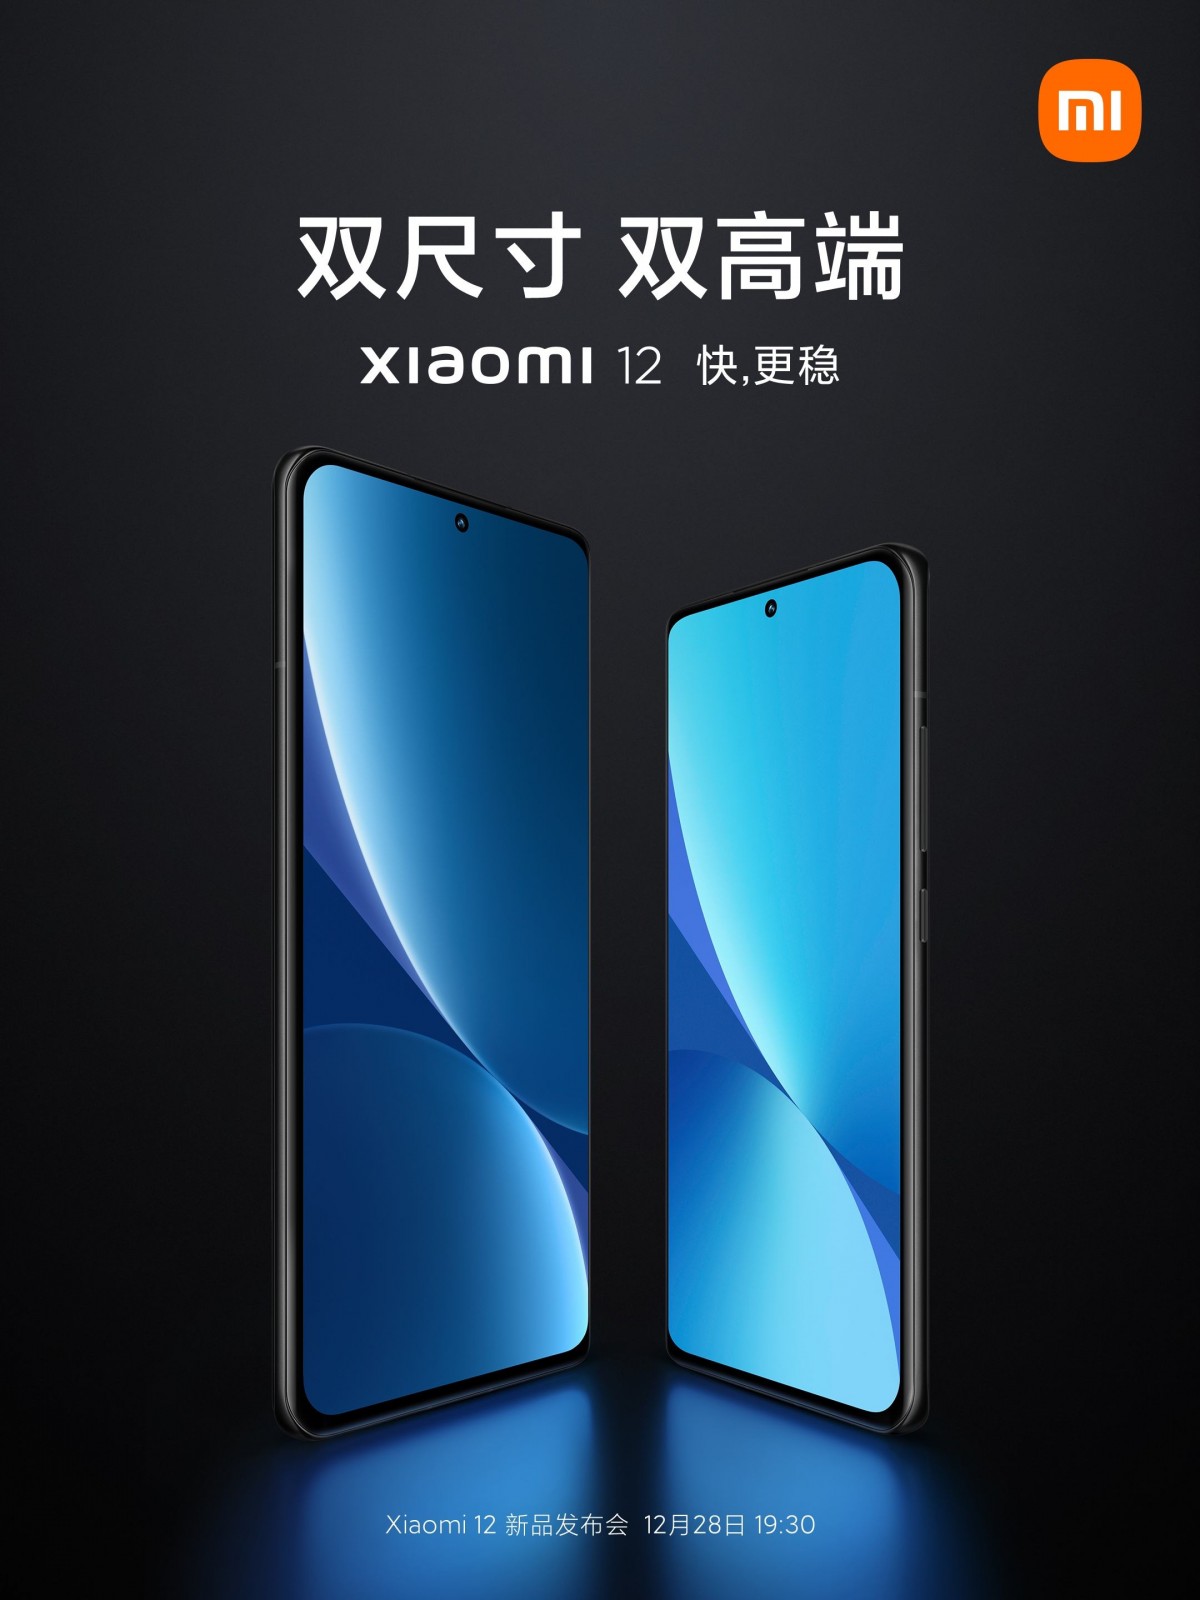 Xiaomi confirms that only two flagship stores will be launched on December 28